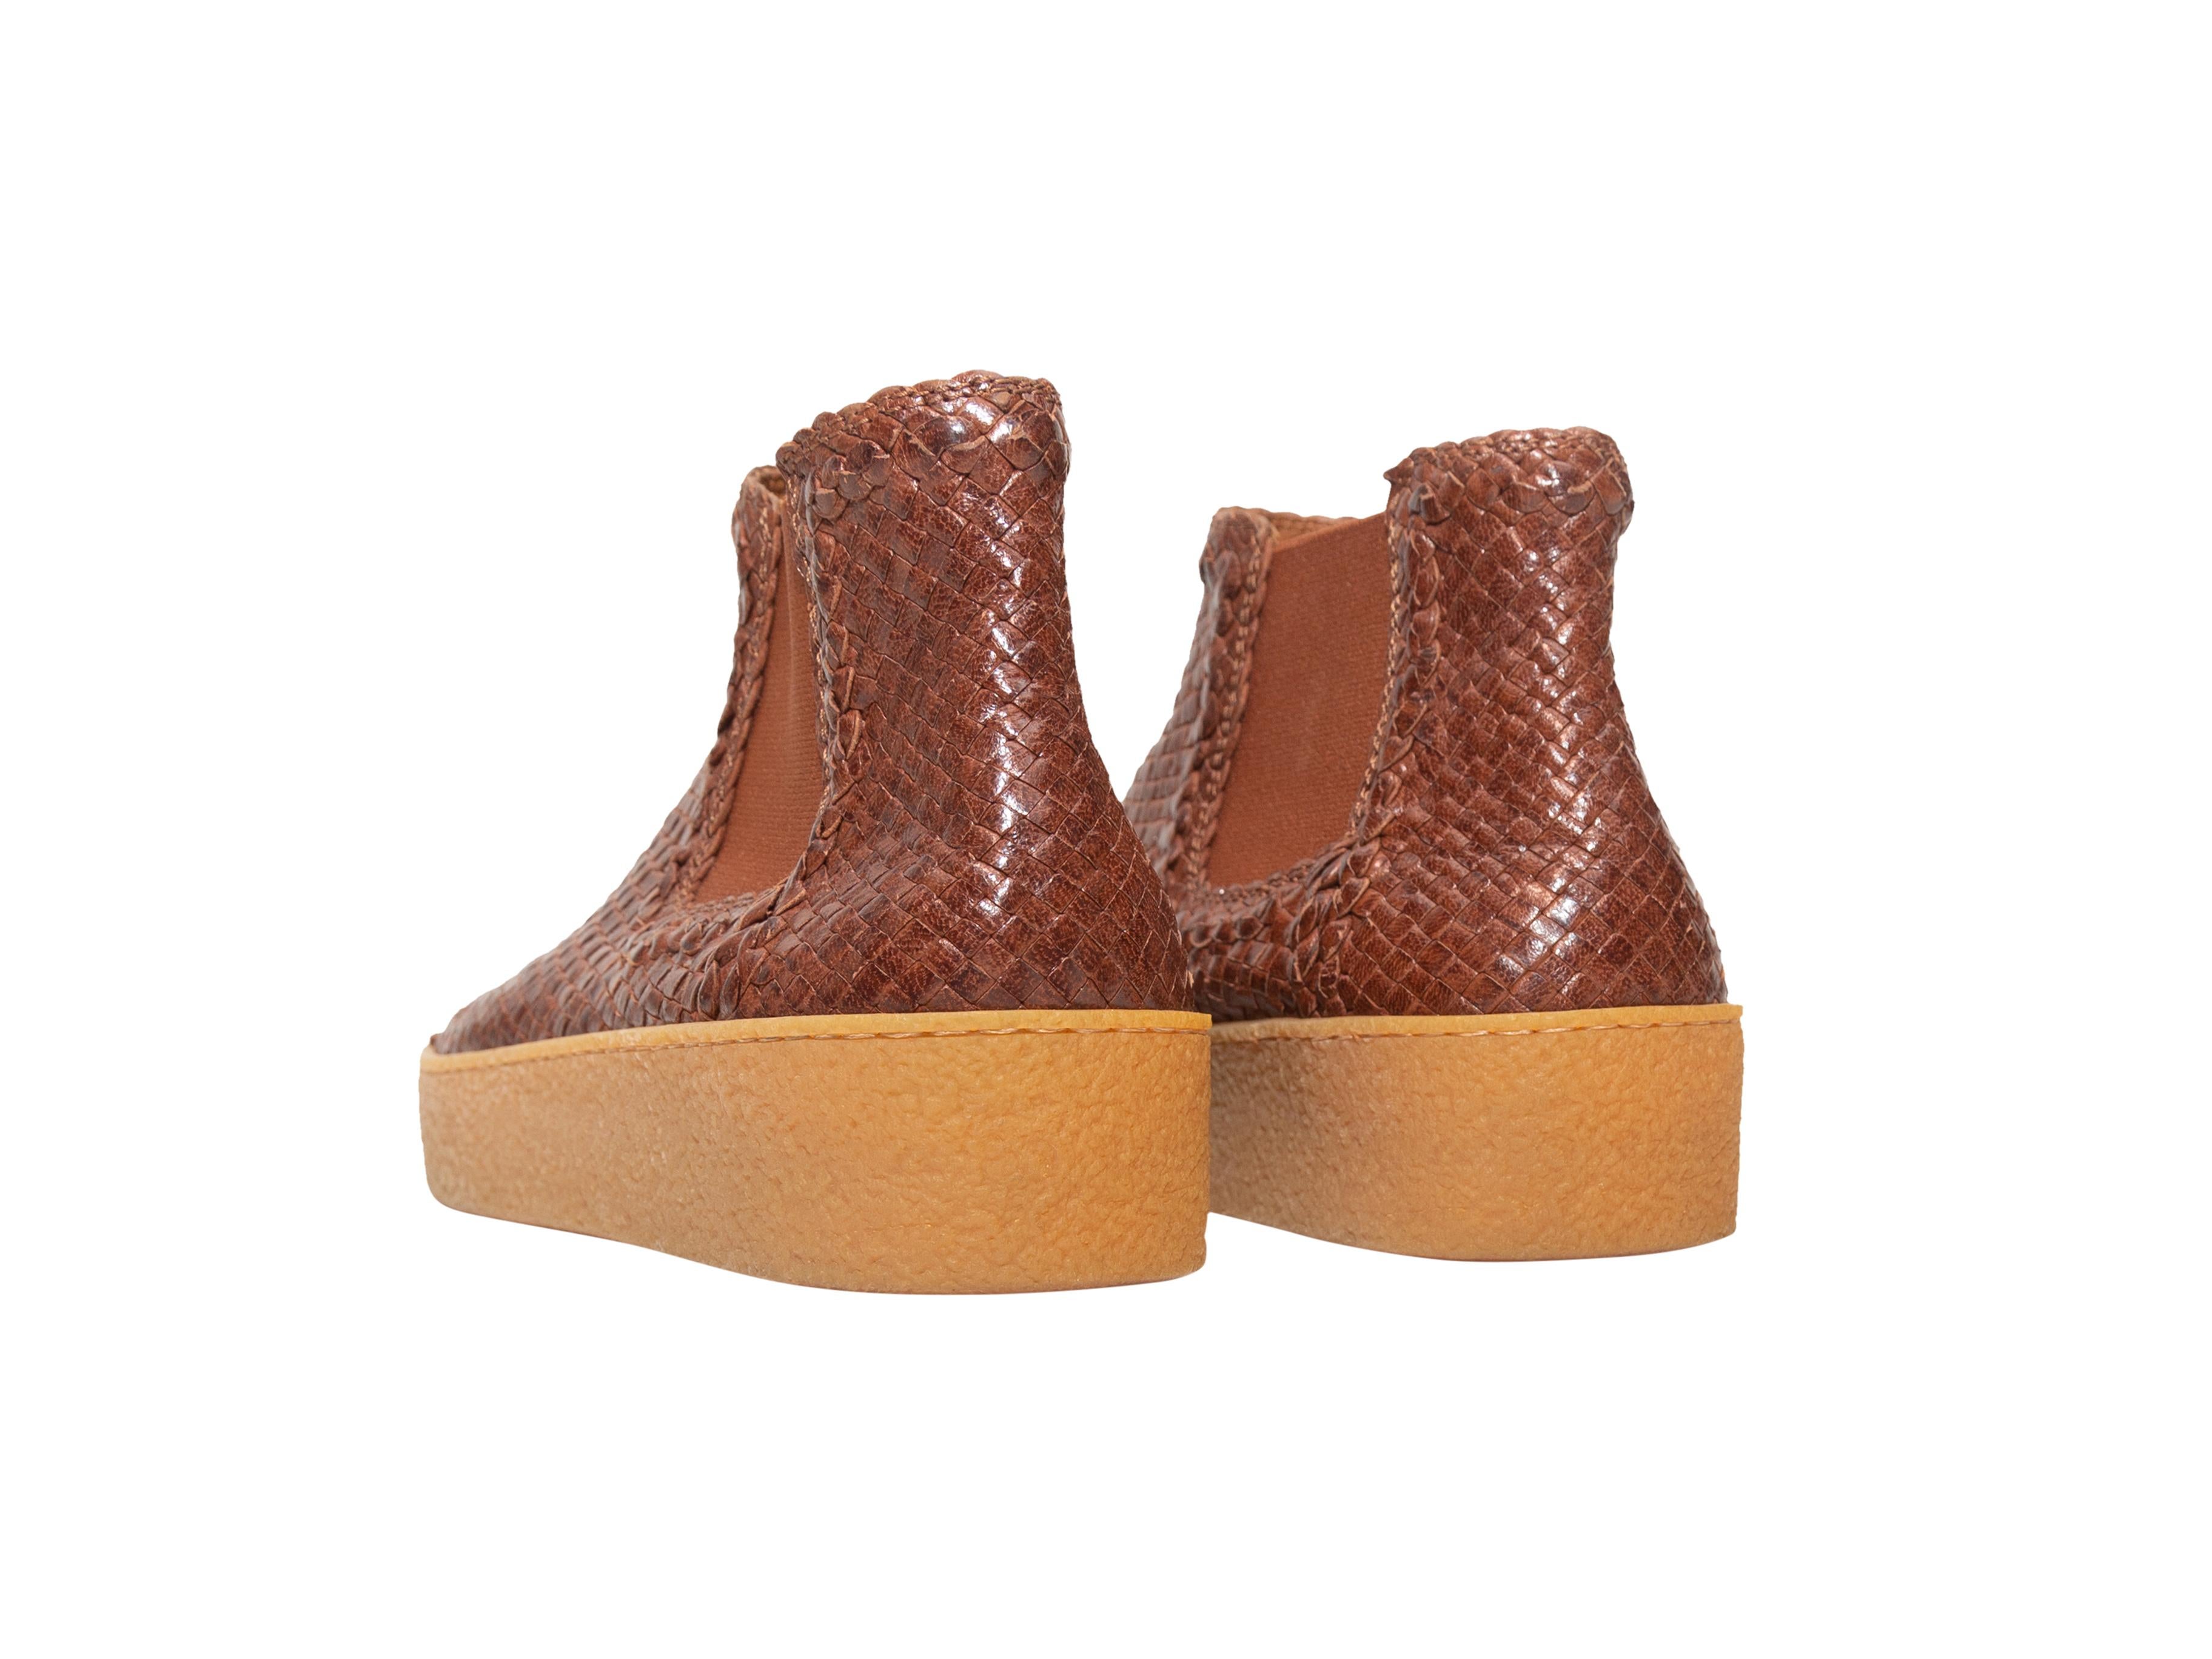 woven leather booties